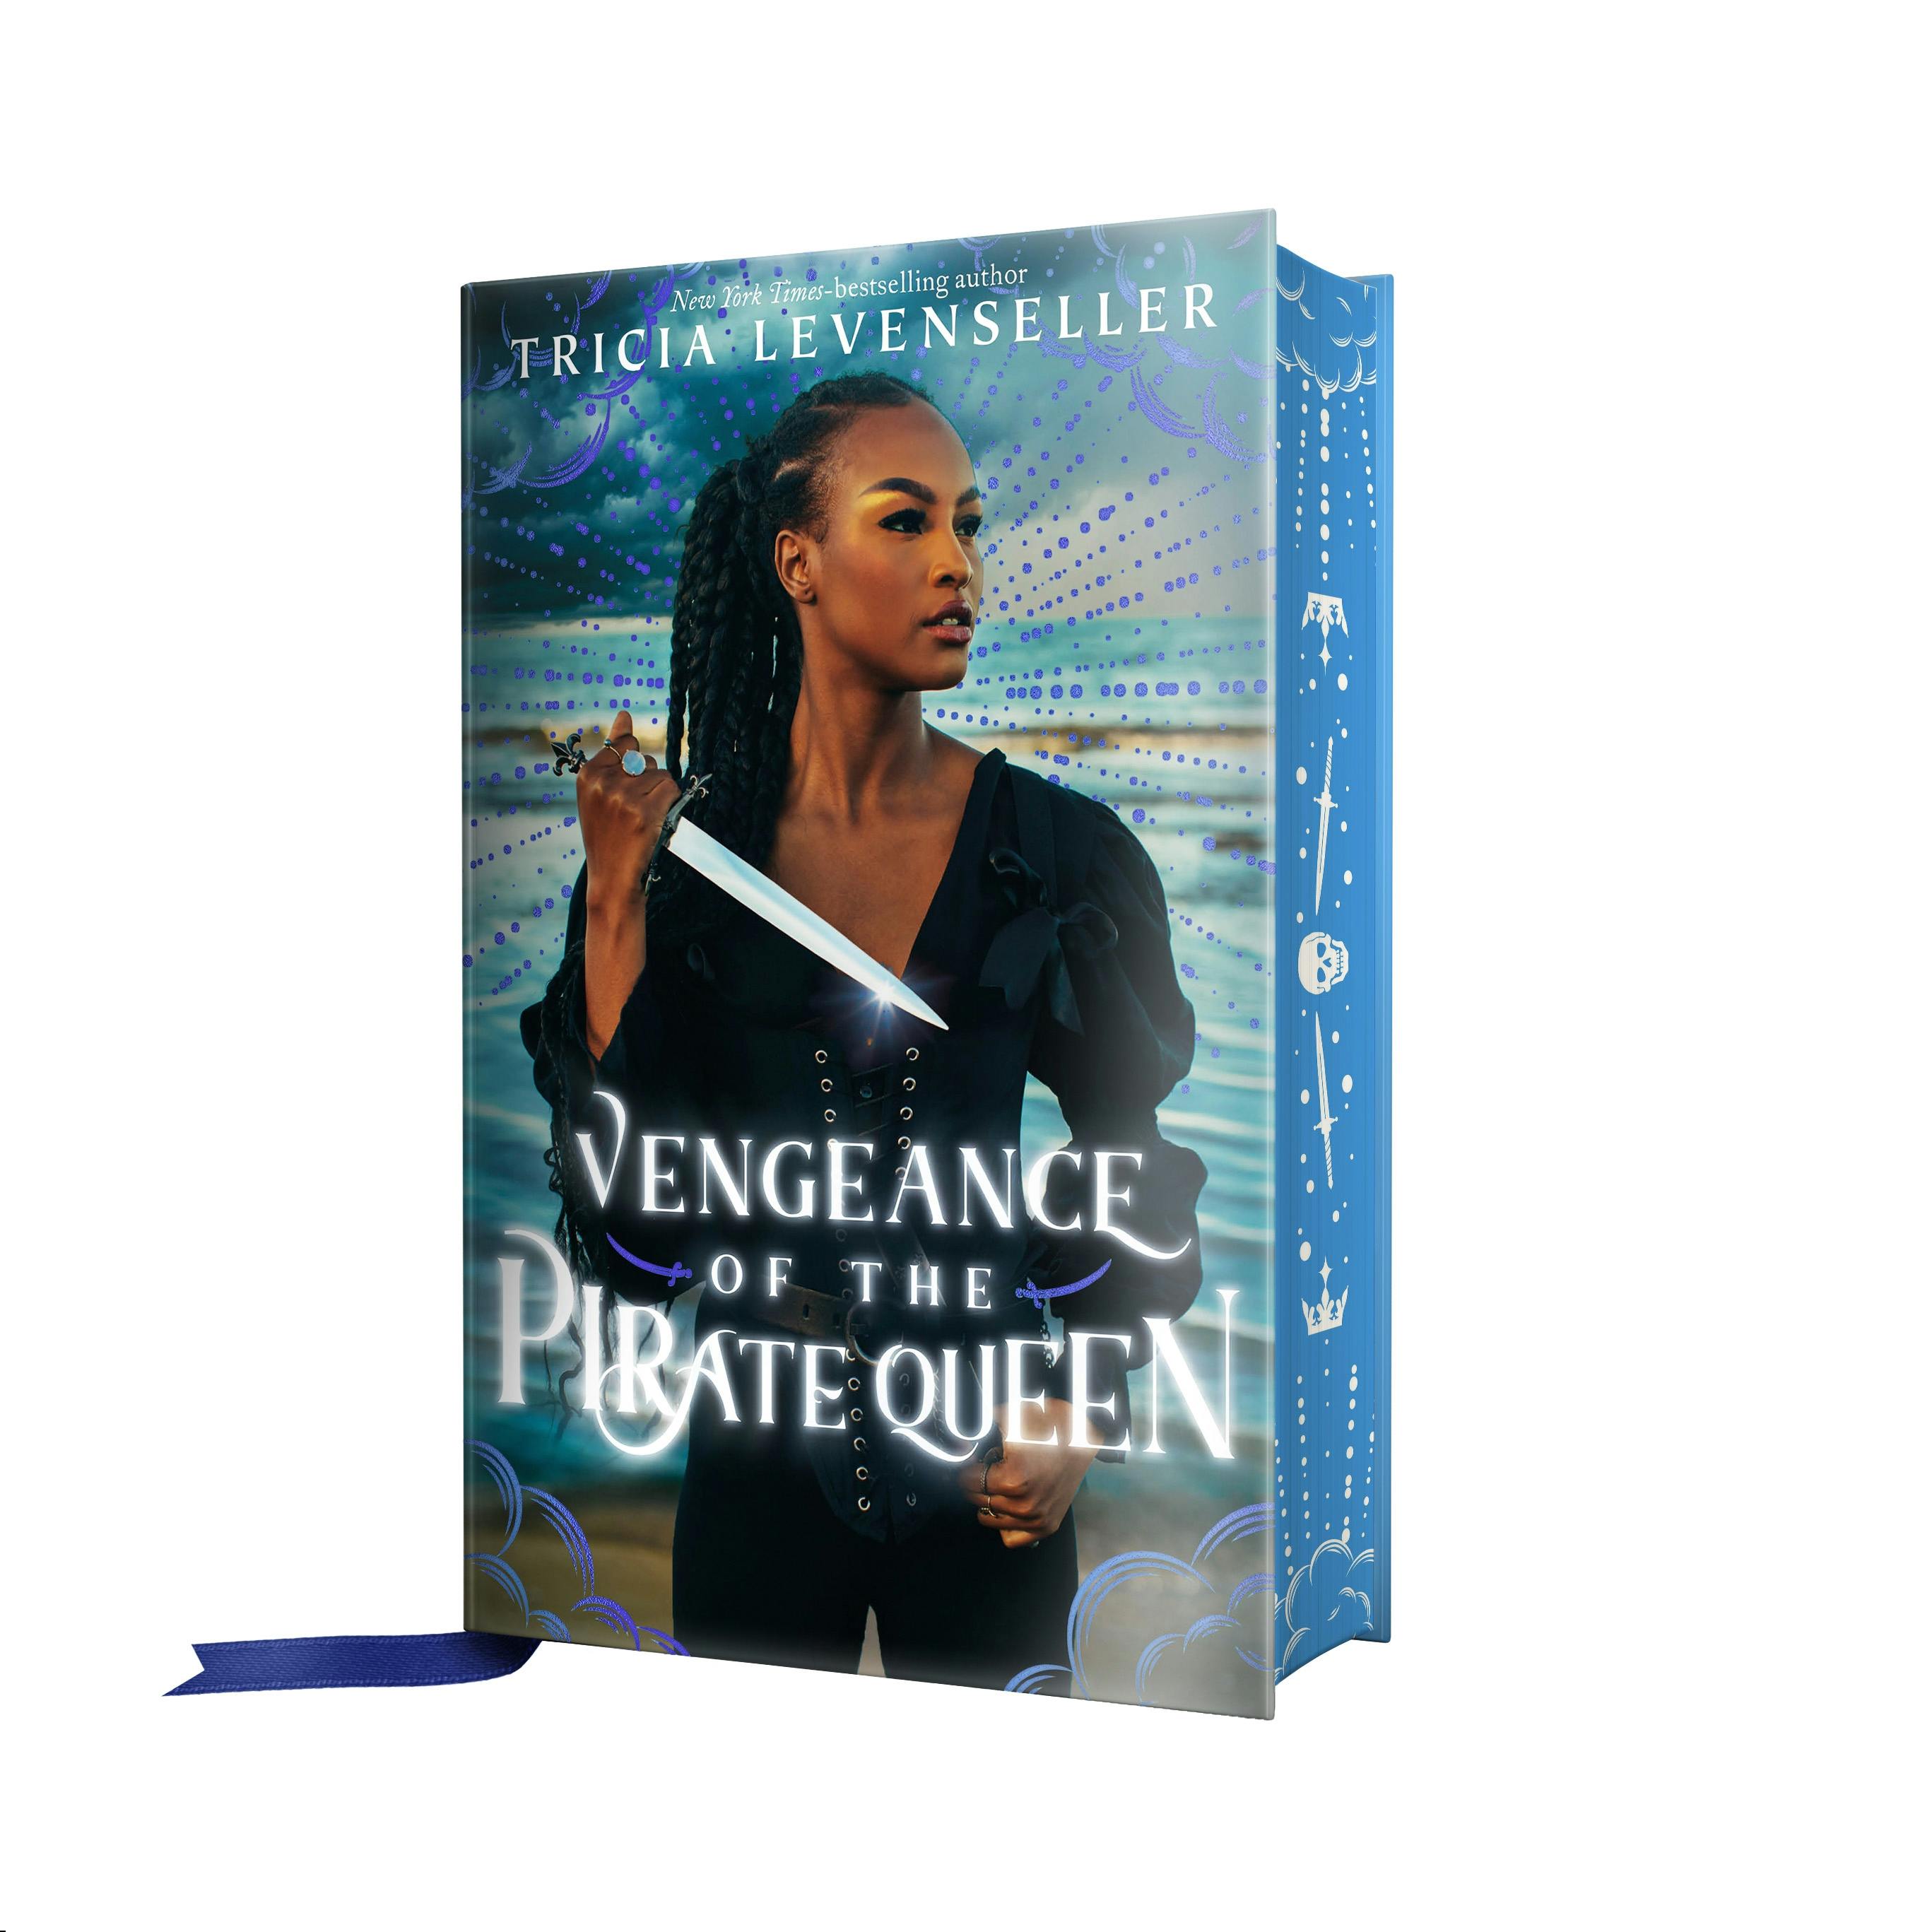 Image of Vengeance of the Pirate Queen